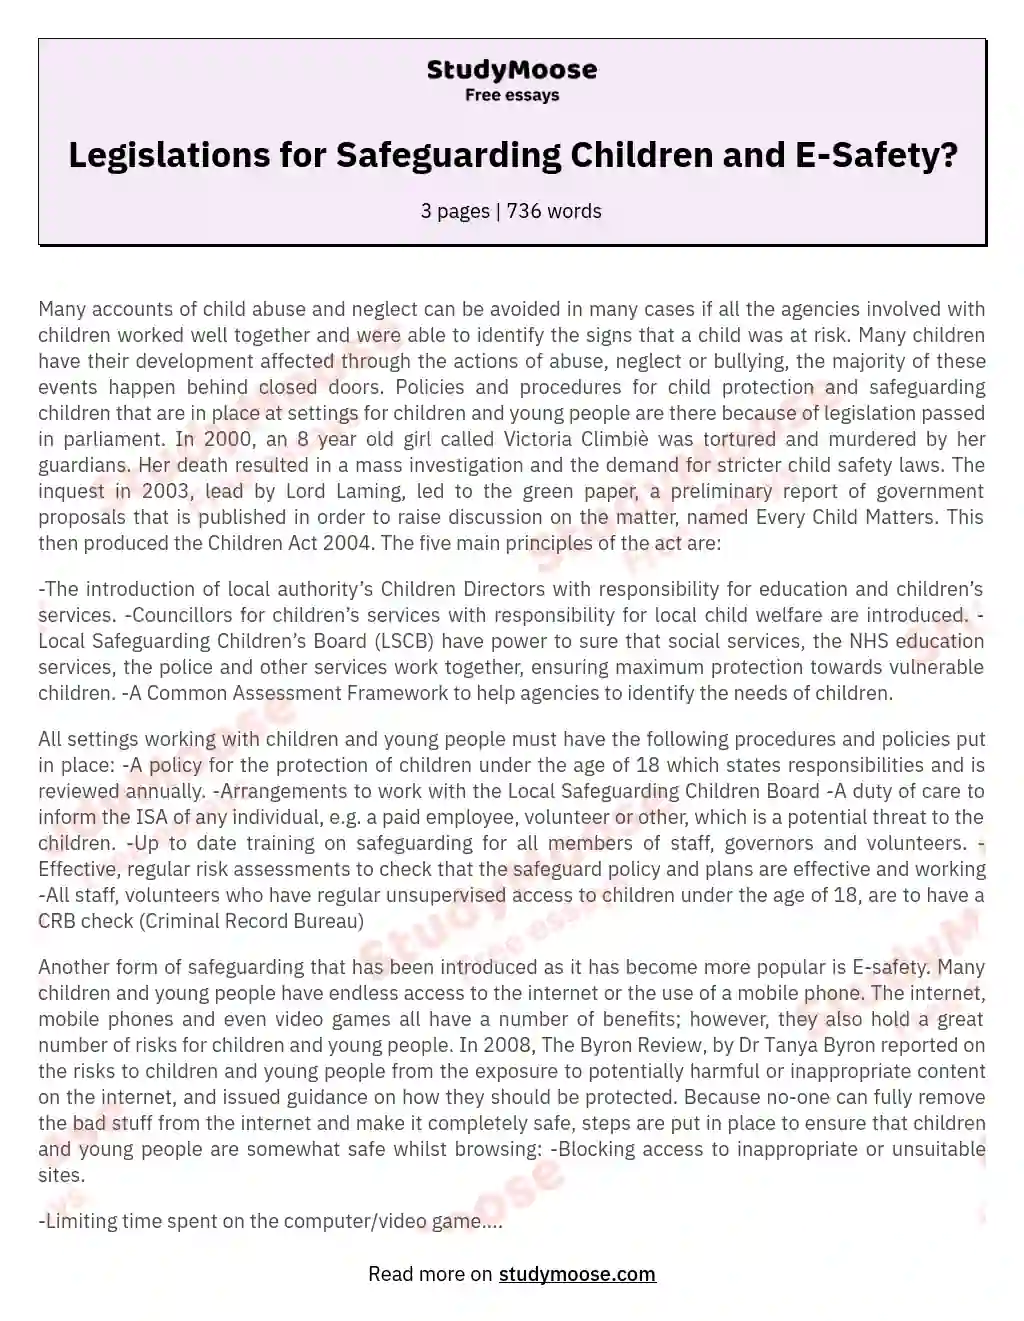 Identify the Current Legislations, Guidelines, Policies and Procedures for Safeguarding the Welfare of Children and Young People Including E-Safety.